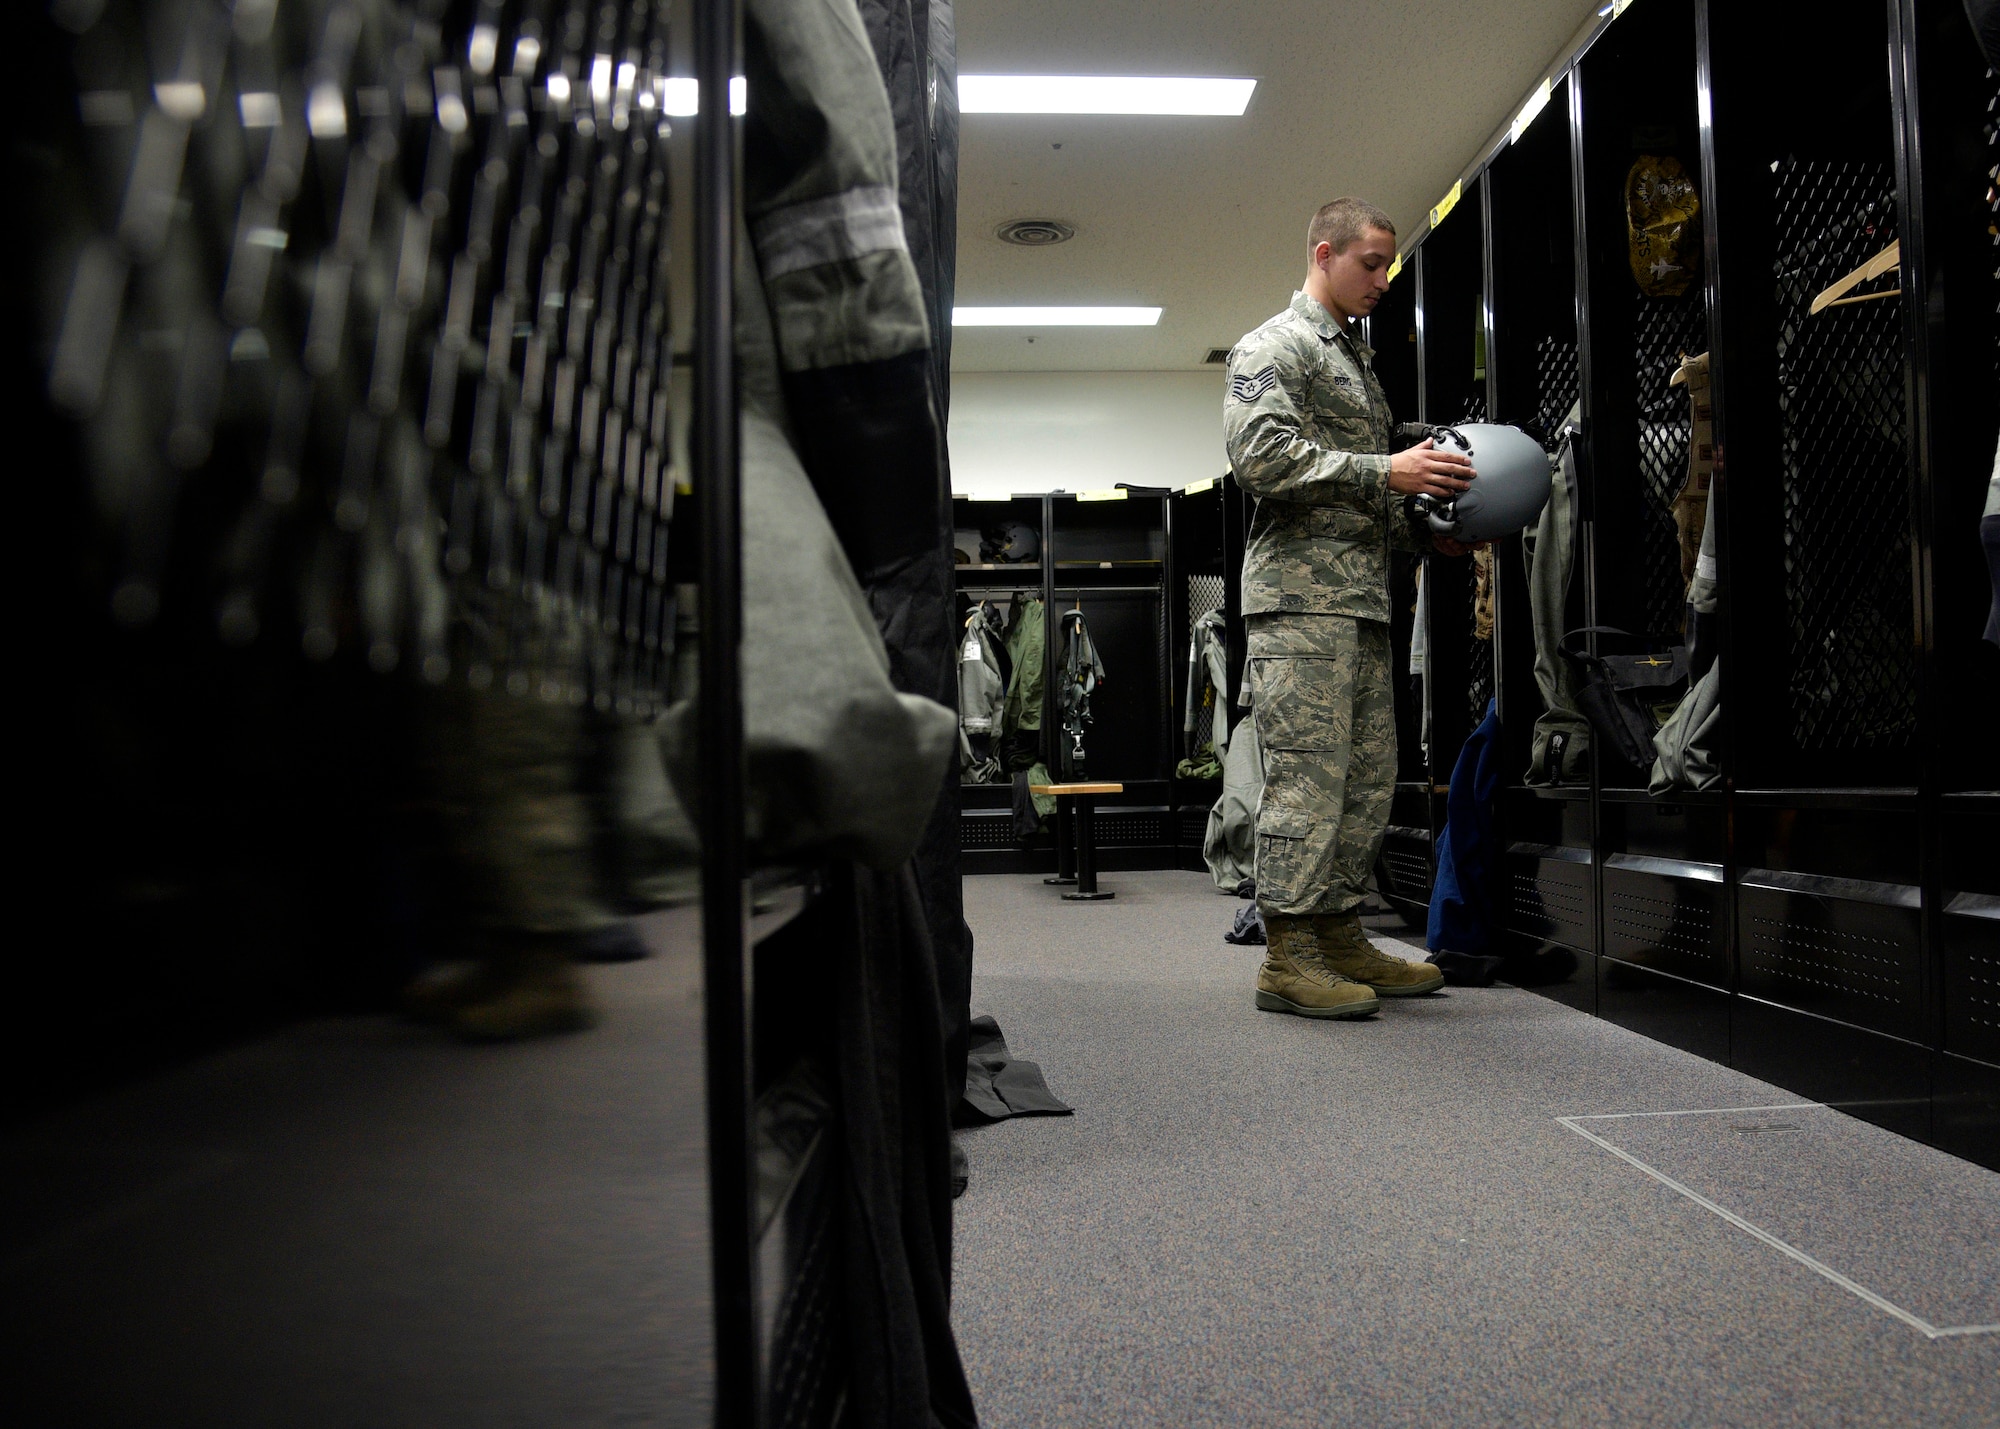 U.S. Air Force Staff Sgt. James Berg, an aircrew flight equipment craftsman with the 35th Operations Support Squadron, places a Joint Helmet Mounted Cueing System helmet inside a pilot’s locker at Misawa Air Base, Japan, March 8, 2016. Daily, AFE Airmen inspect all equipment used by Wild Weasel pilot during flight; ensuring each piece of equipment is fully operational and safe. (U.S. Air Force photo by Senior Airman Deana Heitzman)